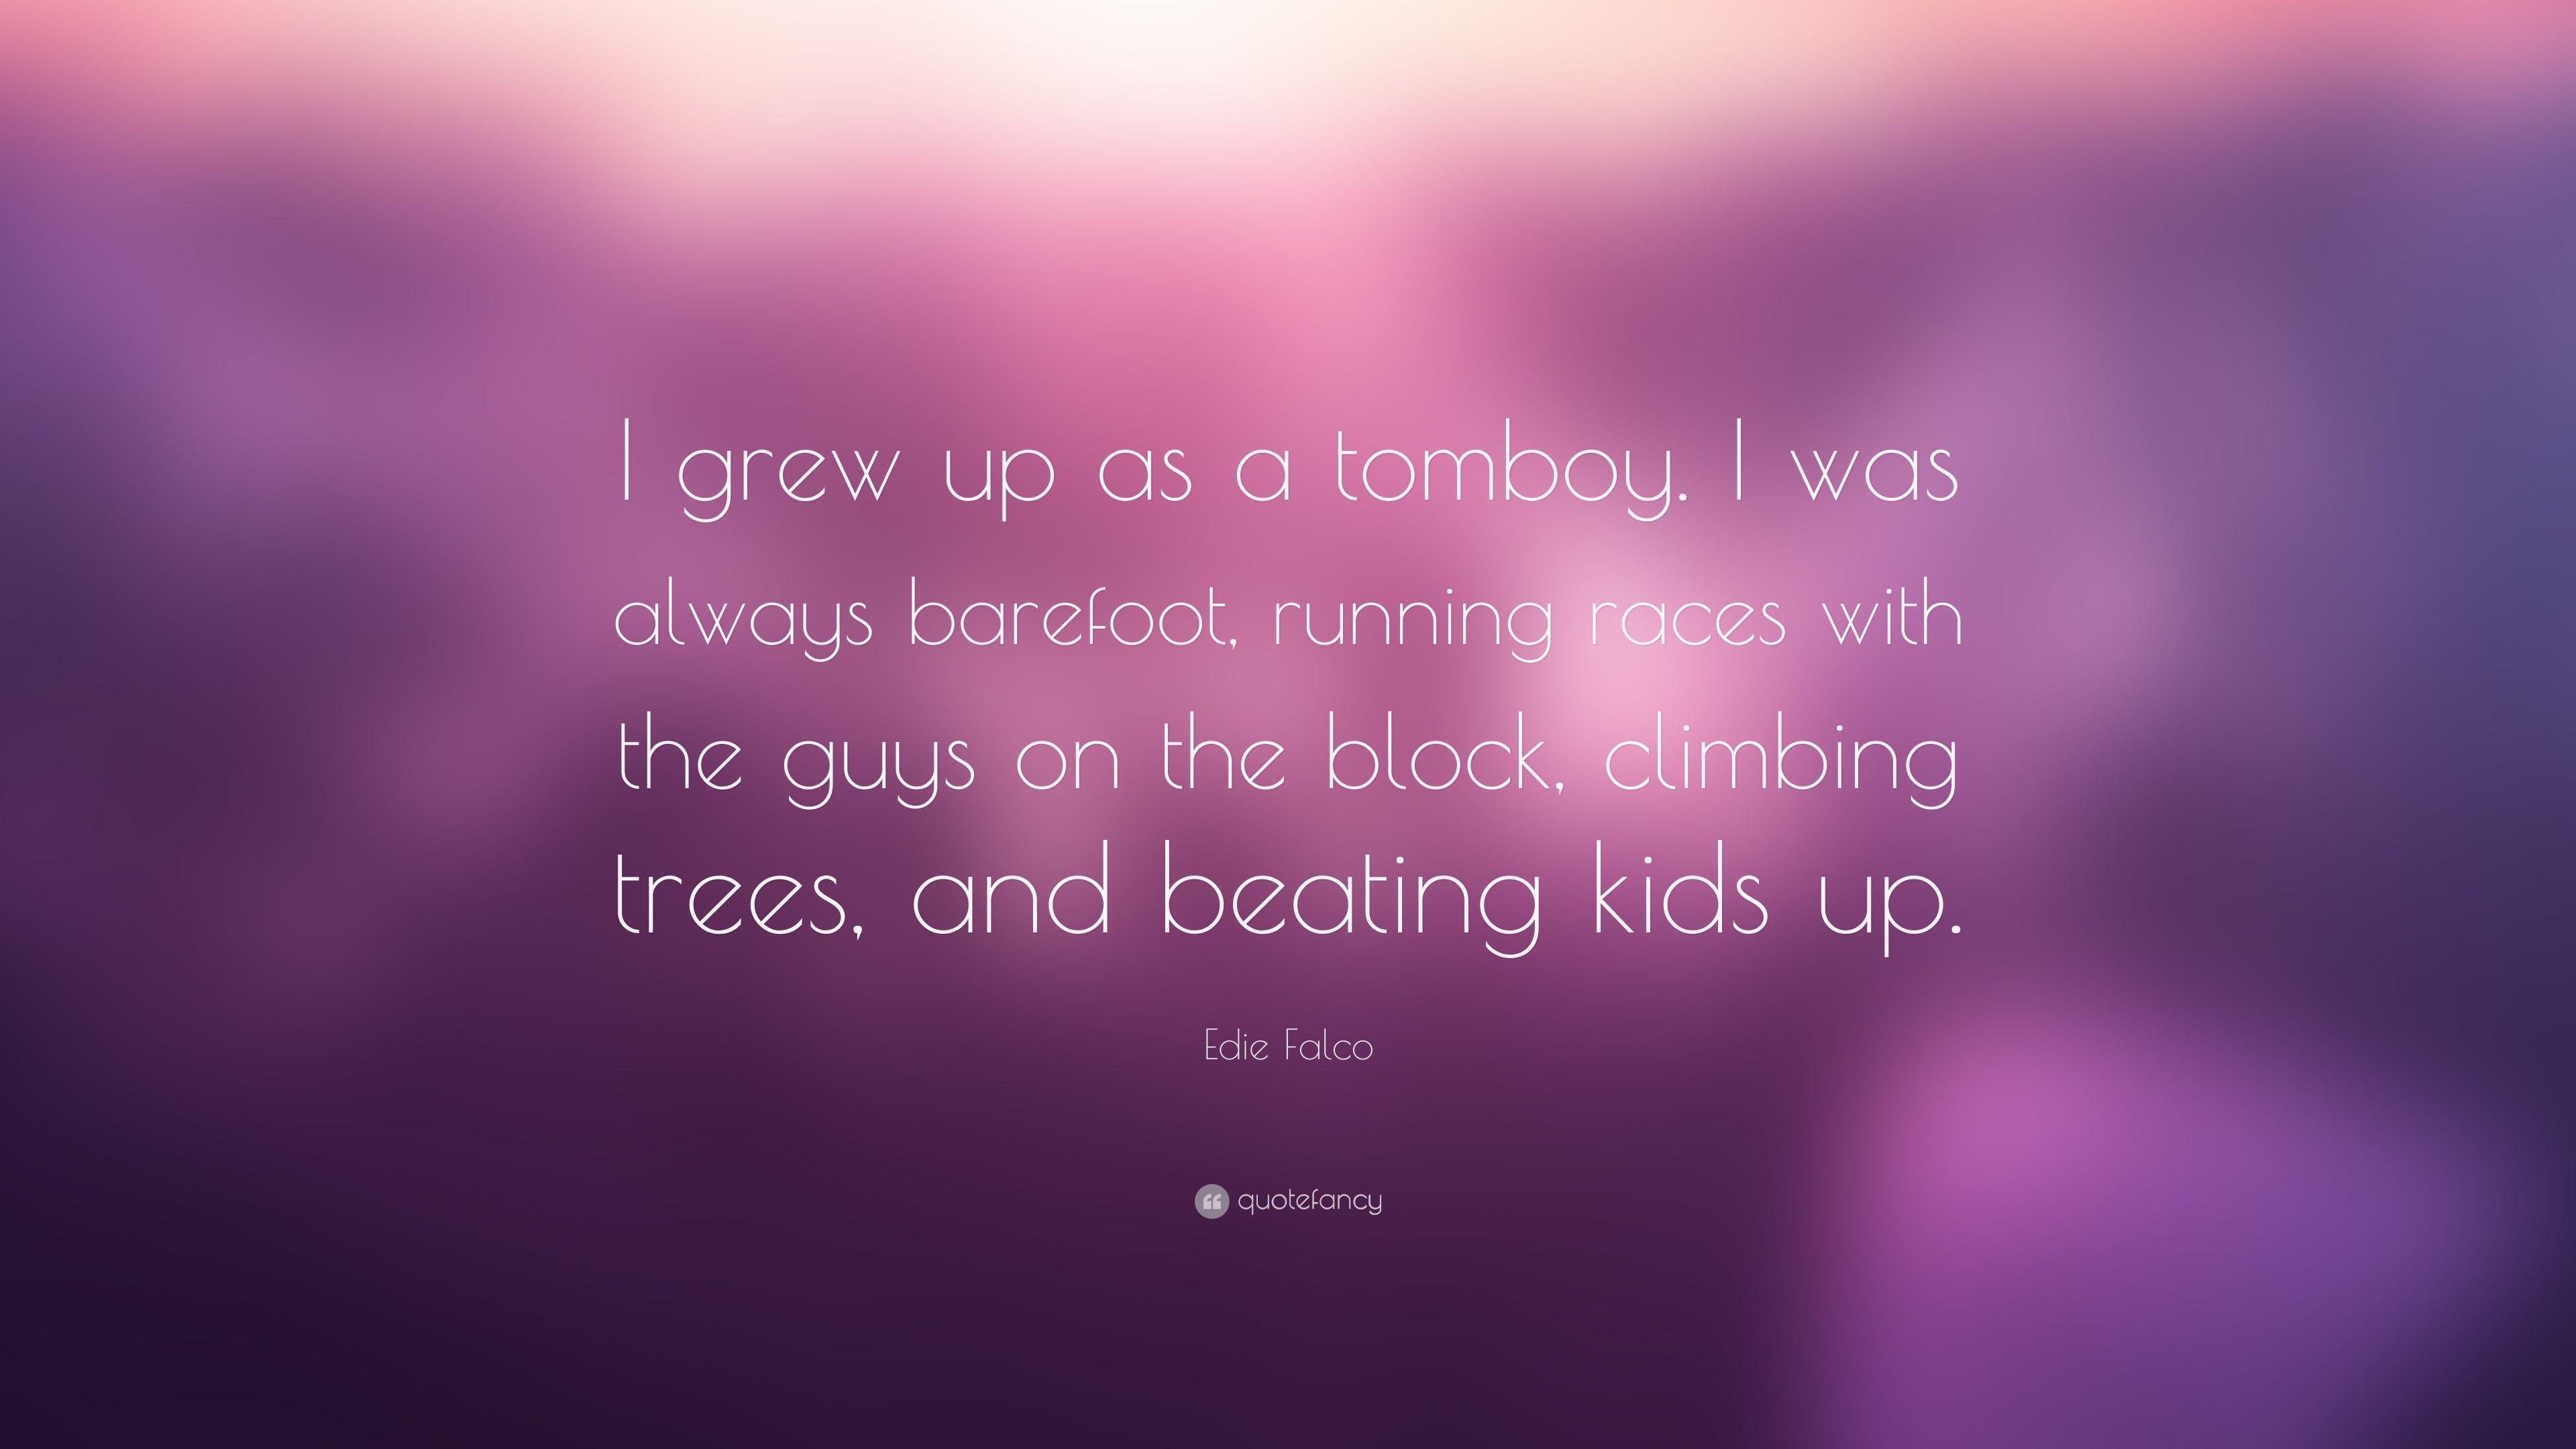 Edie Falco Quote: “I grew up as a tomboy. I was always barefoot